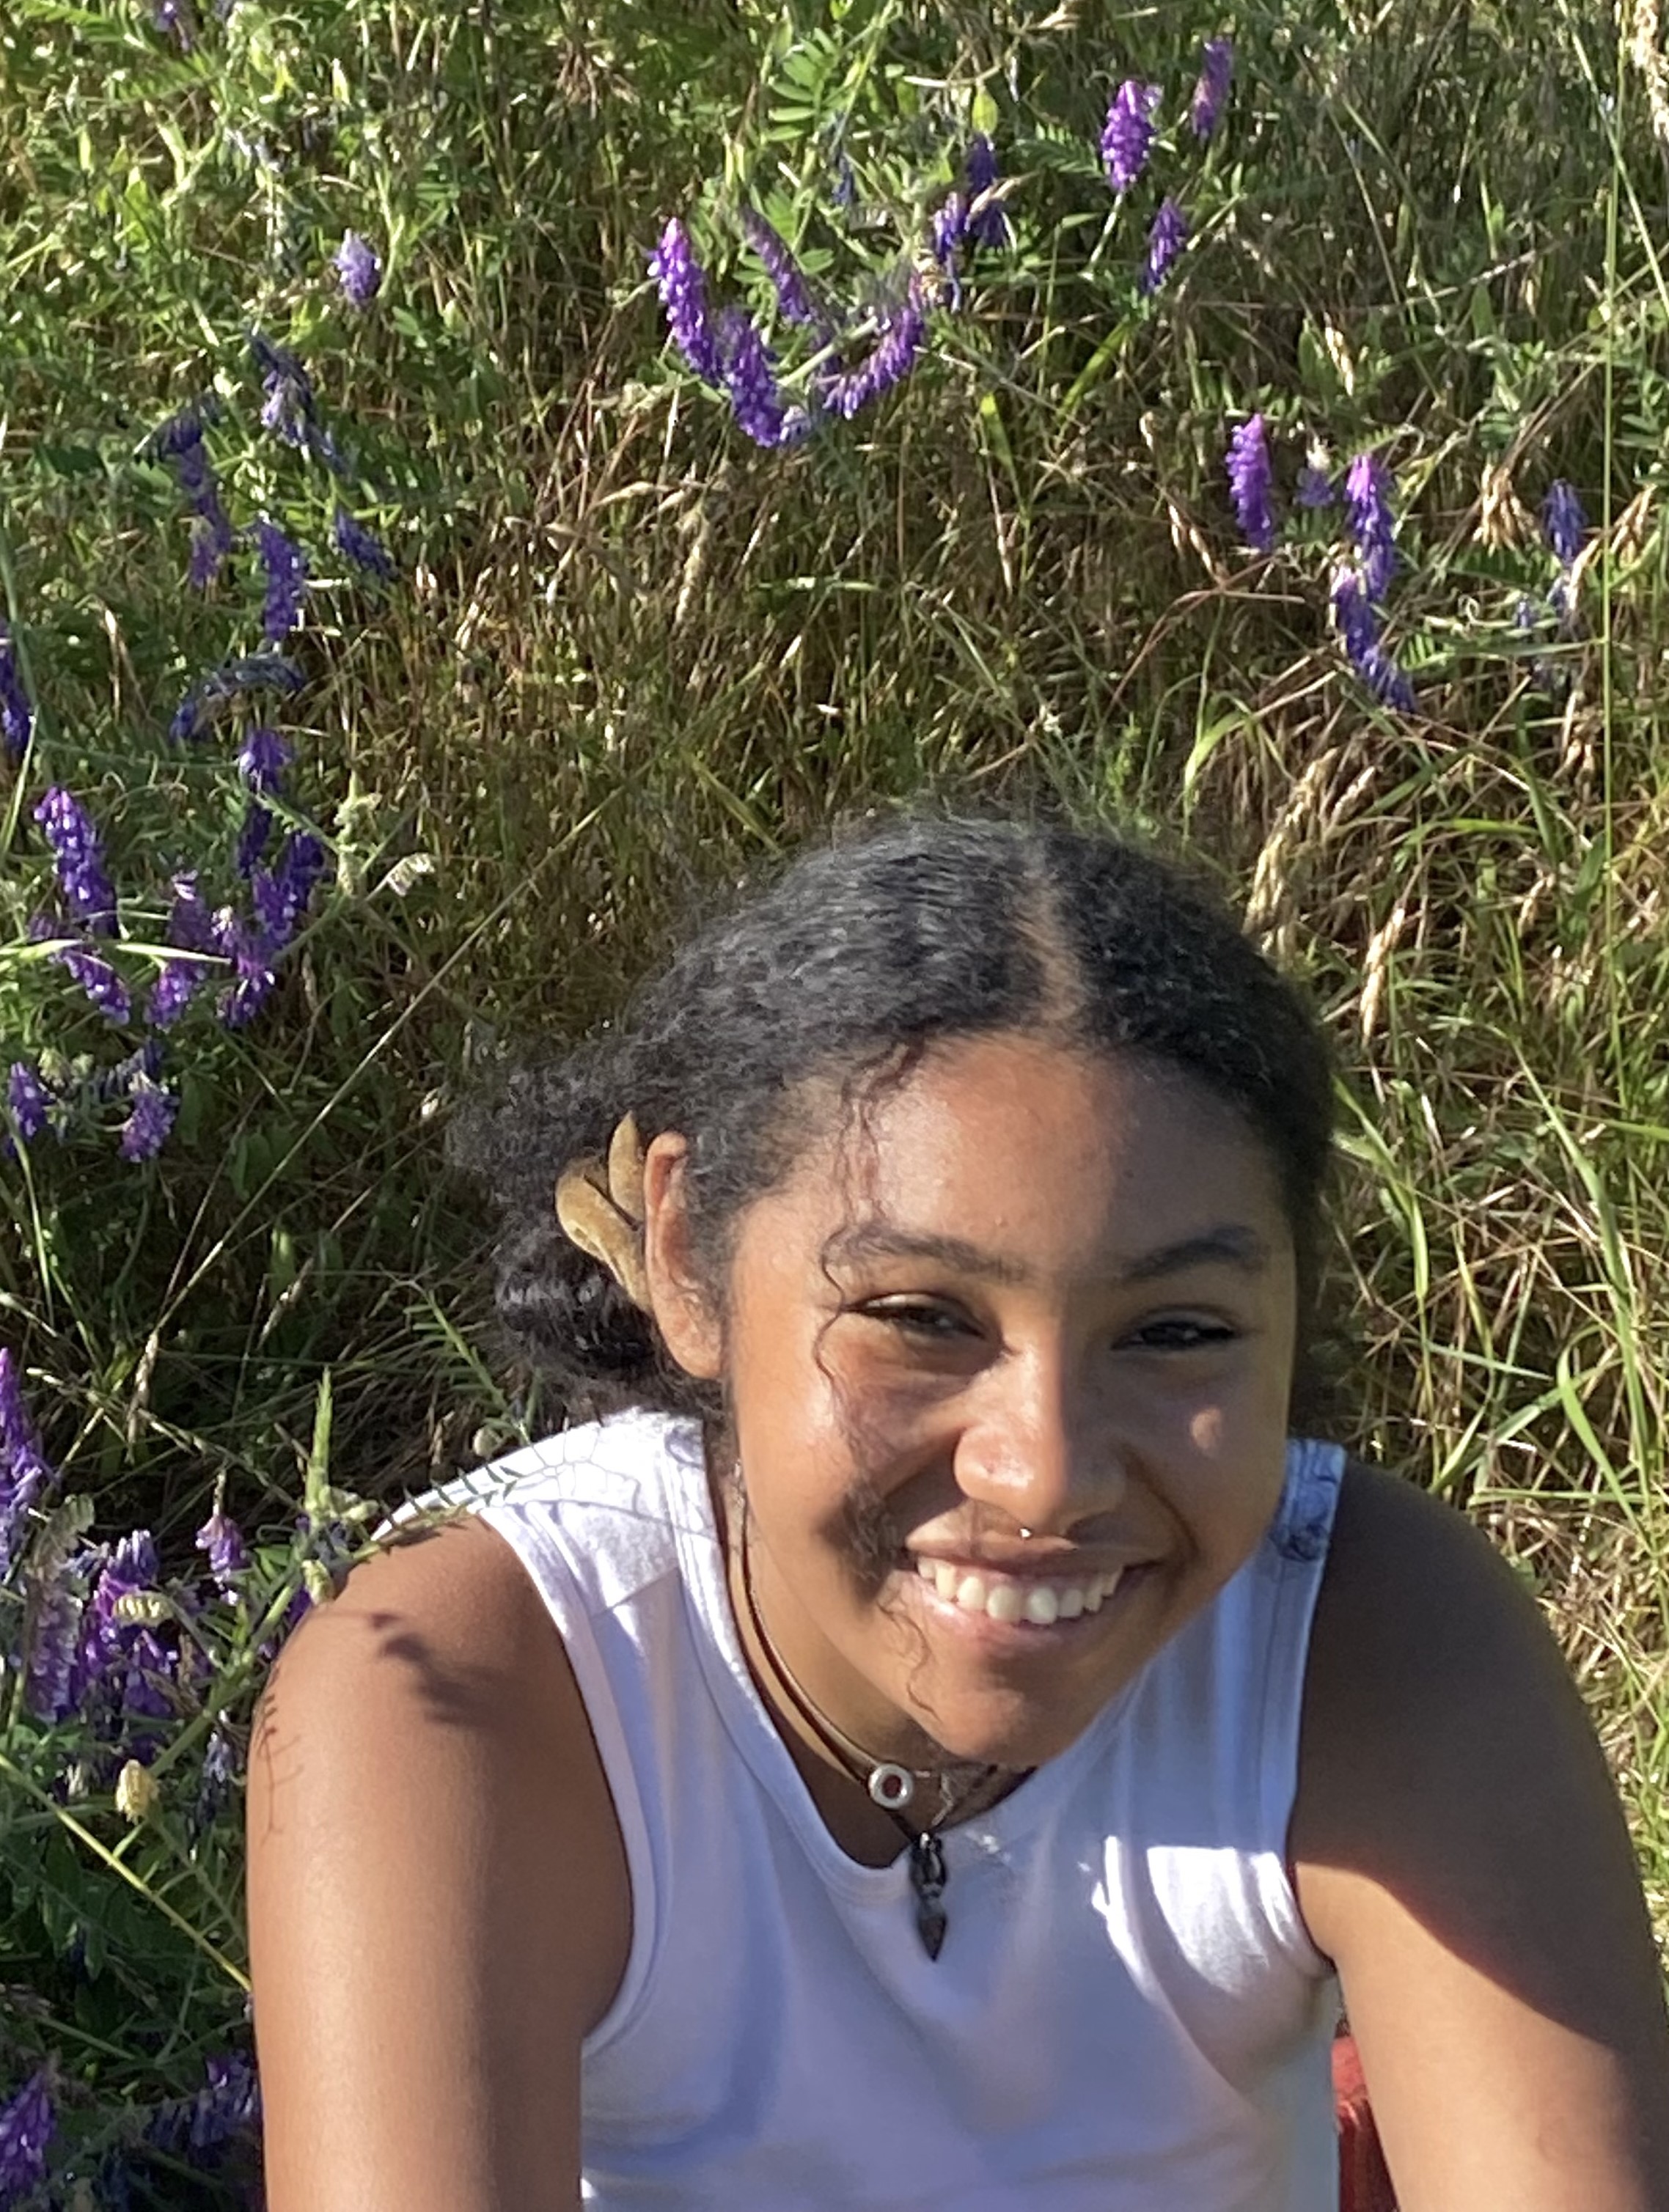 Sophia smiling, wearing a white tank top and sitting in a field of lavender 